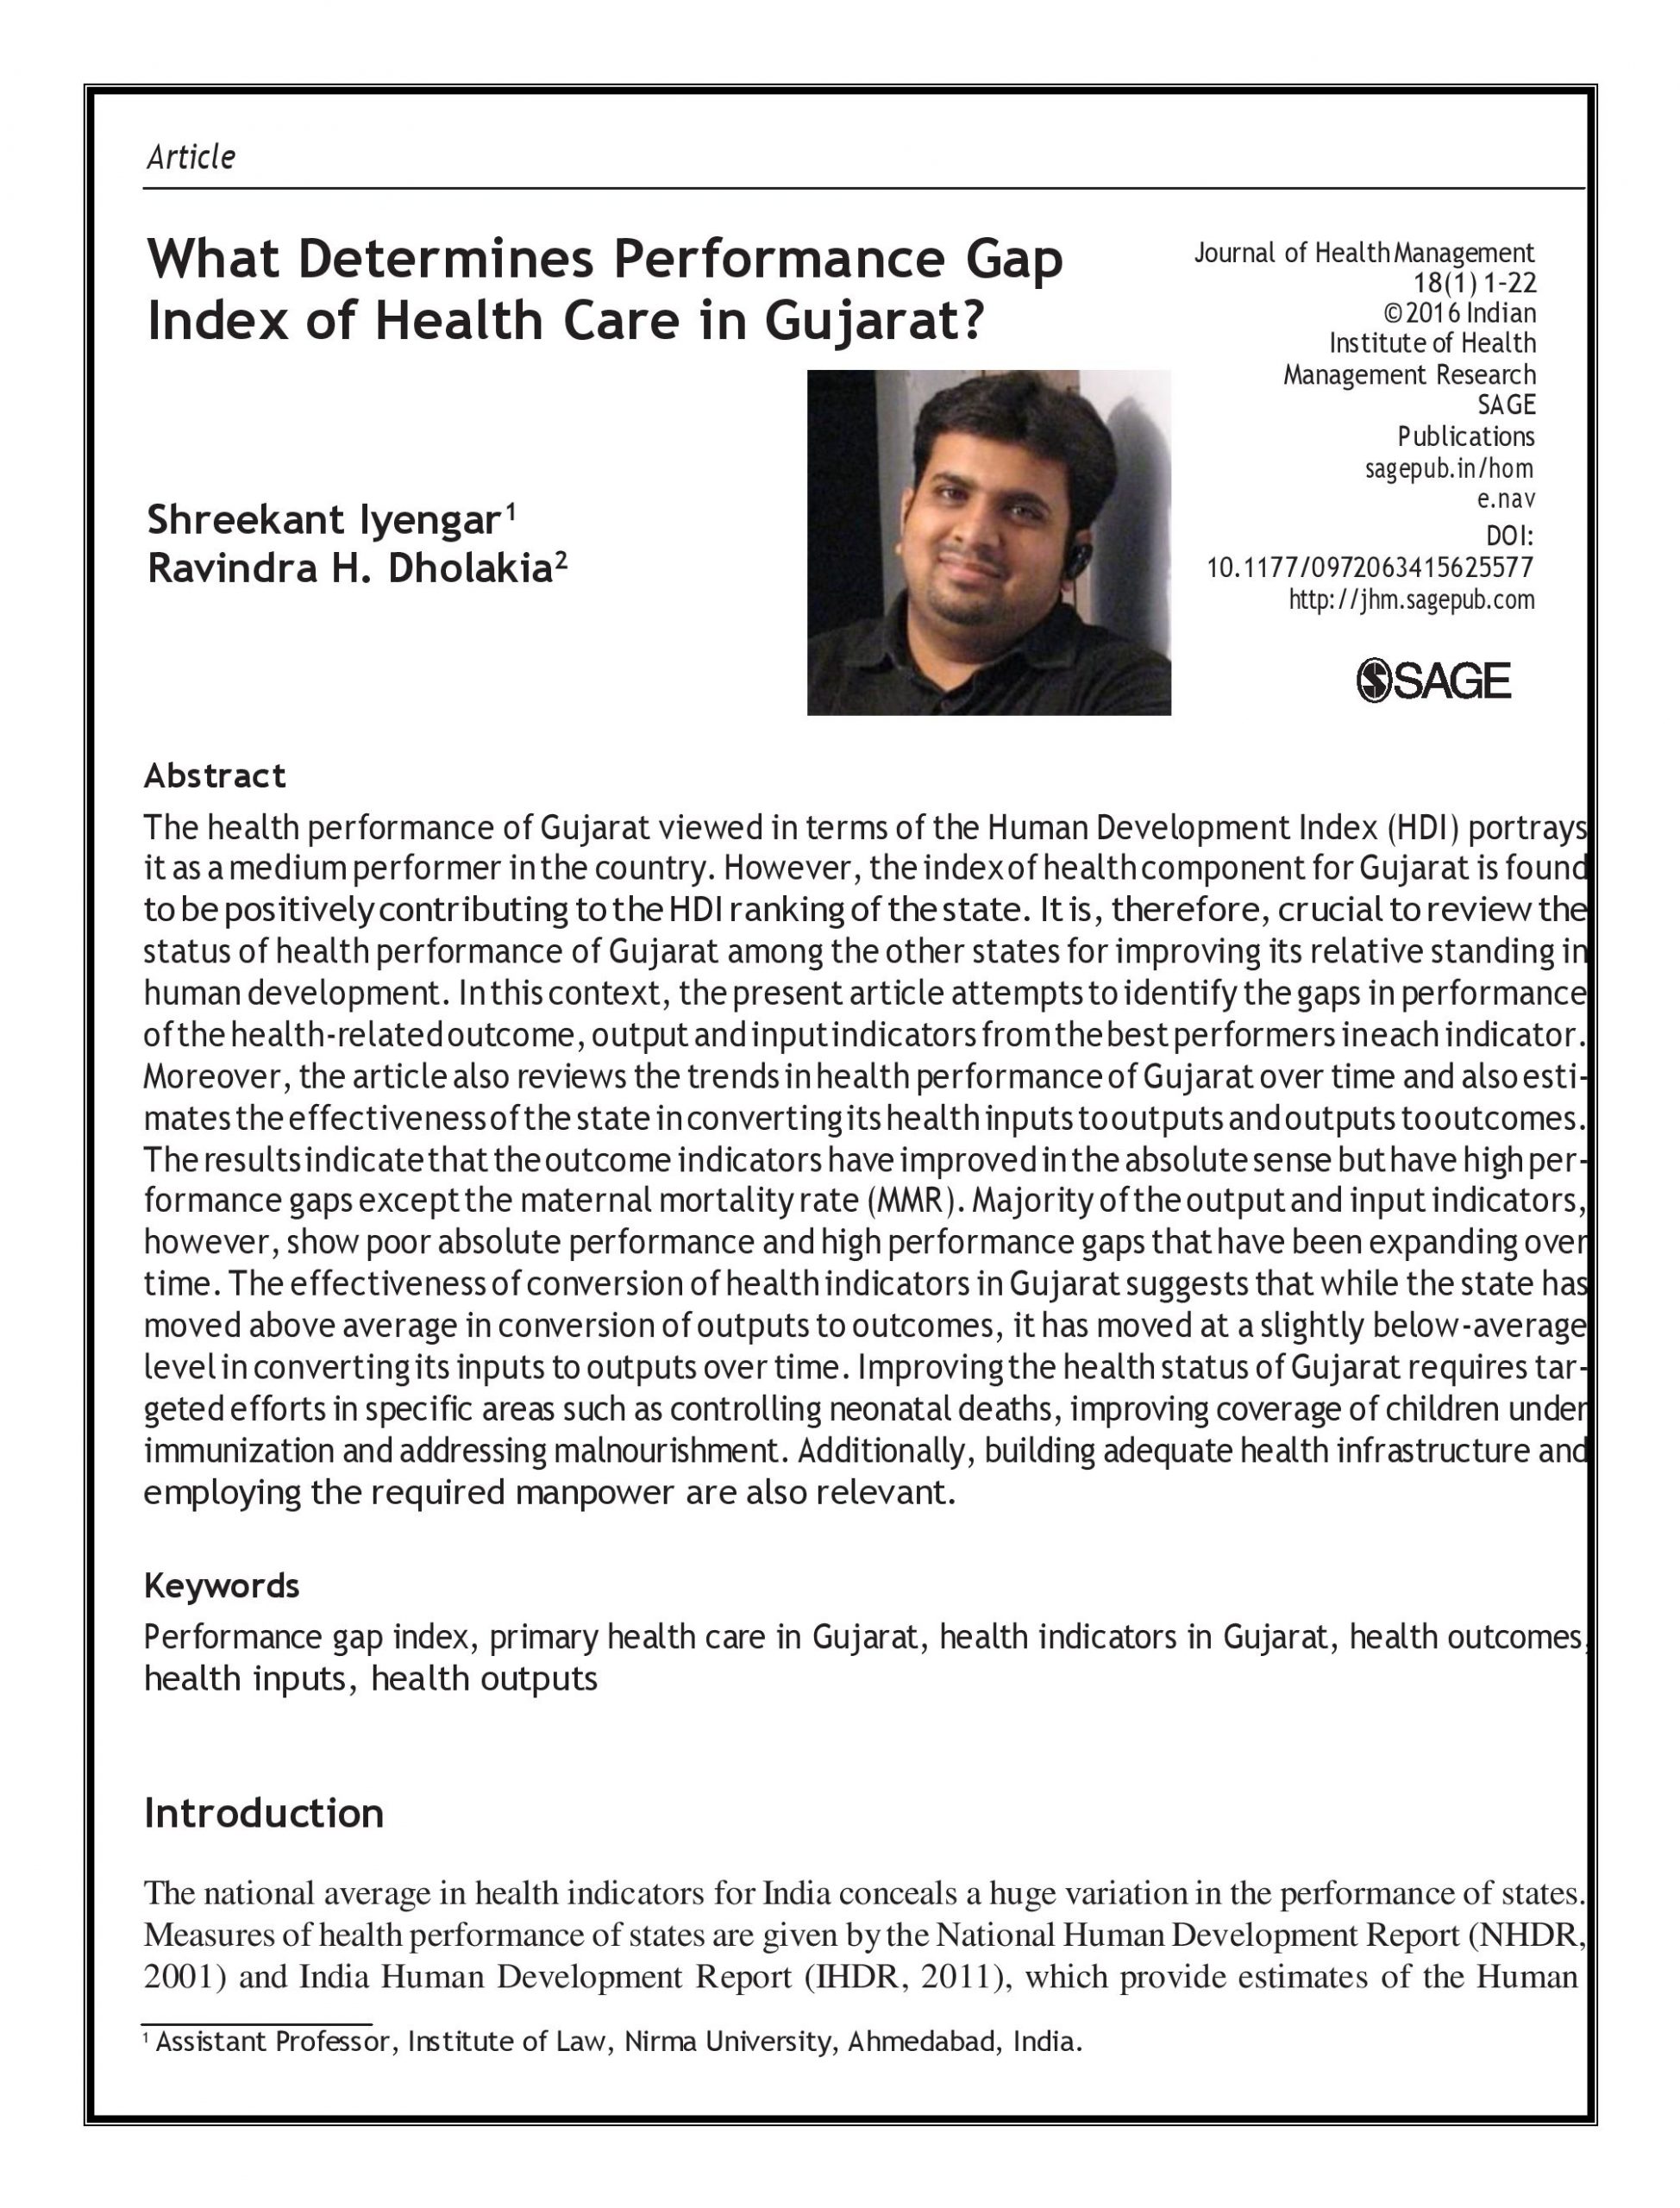 What Determines Performance Gap Index of Health Care in Gujarat?